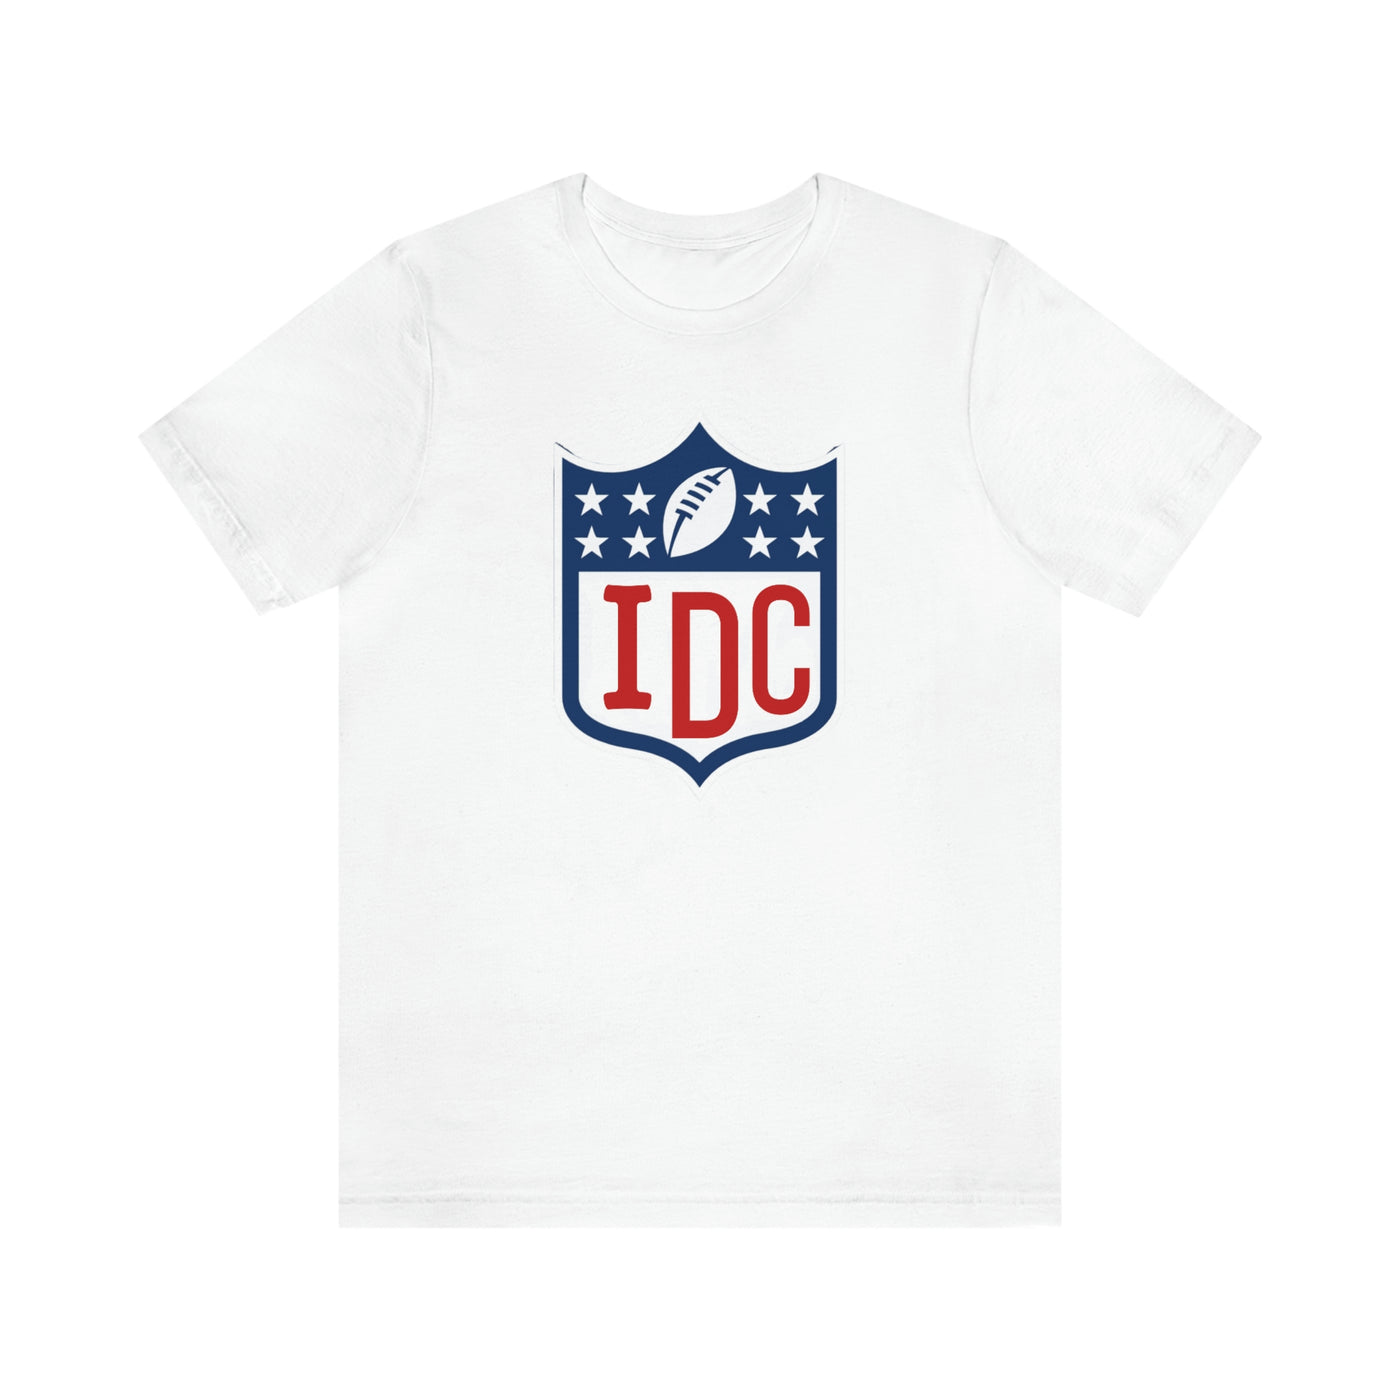 NFL I Don't Care Tee